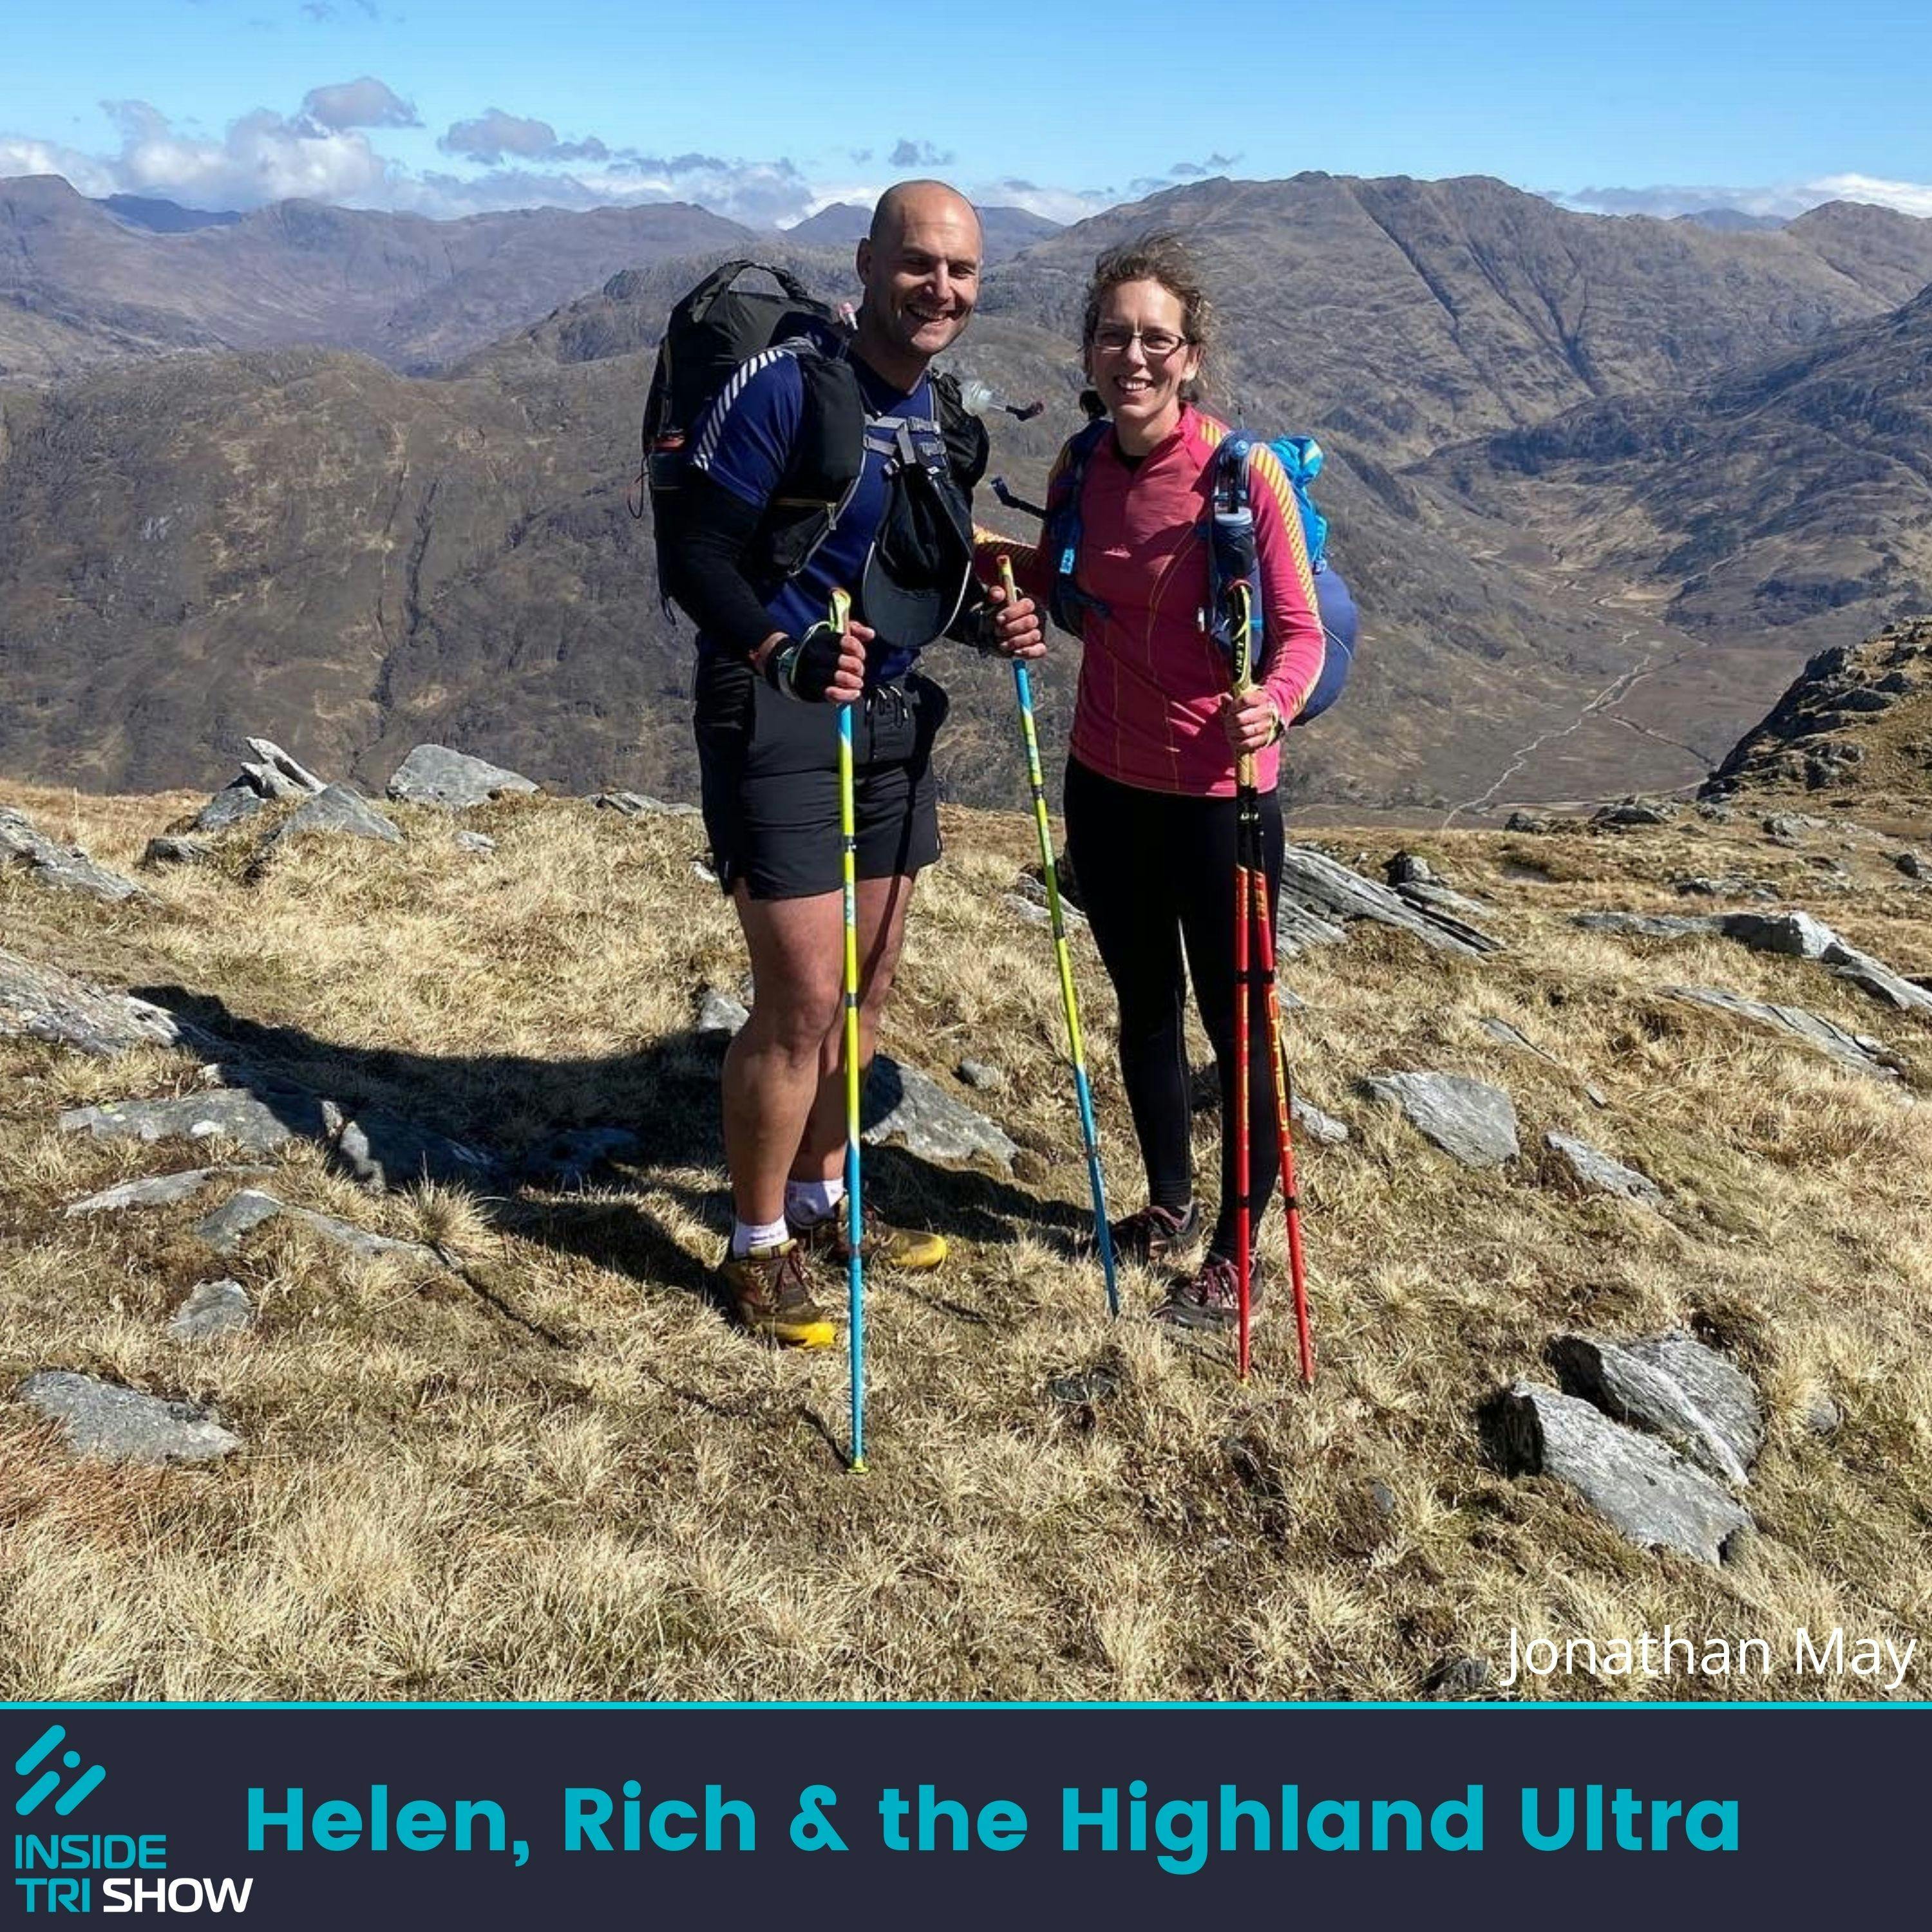 Behind the scenes at Beyond the Ultimate's Highland Ultra